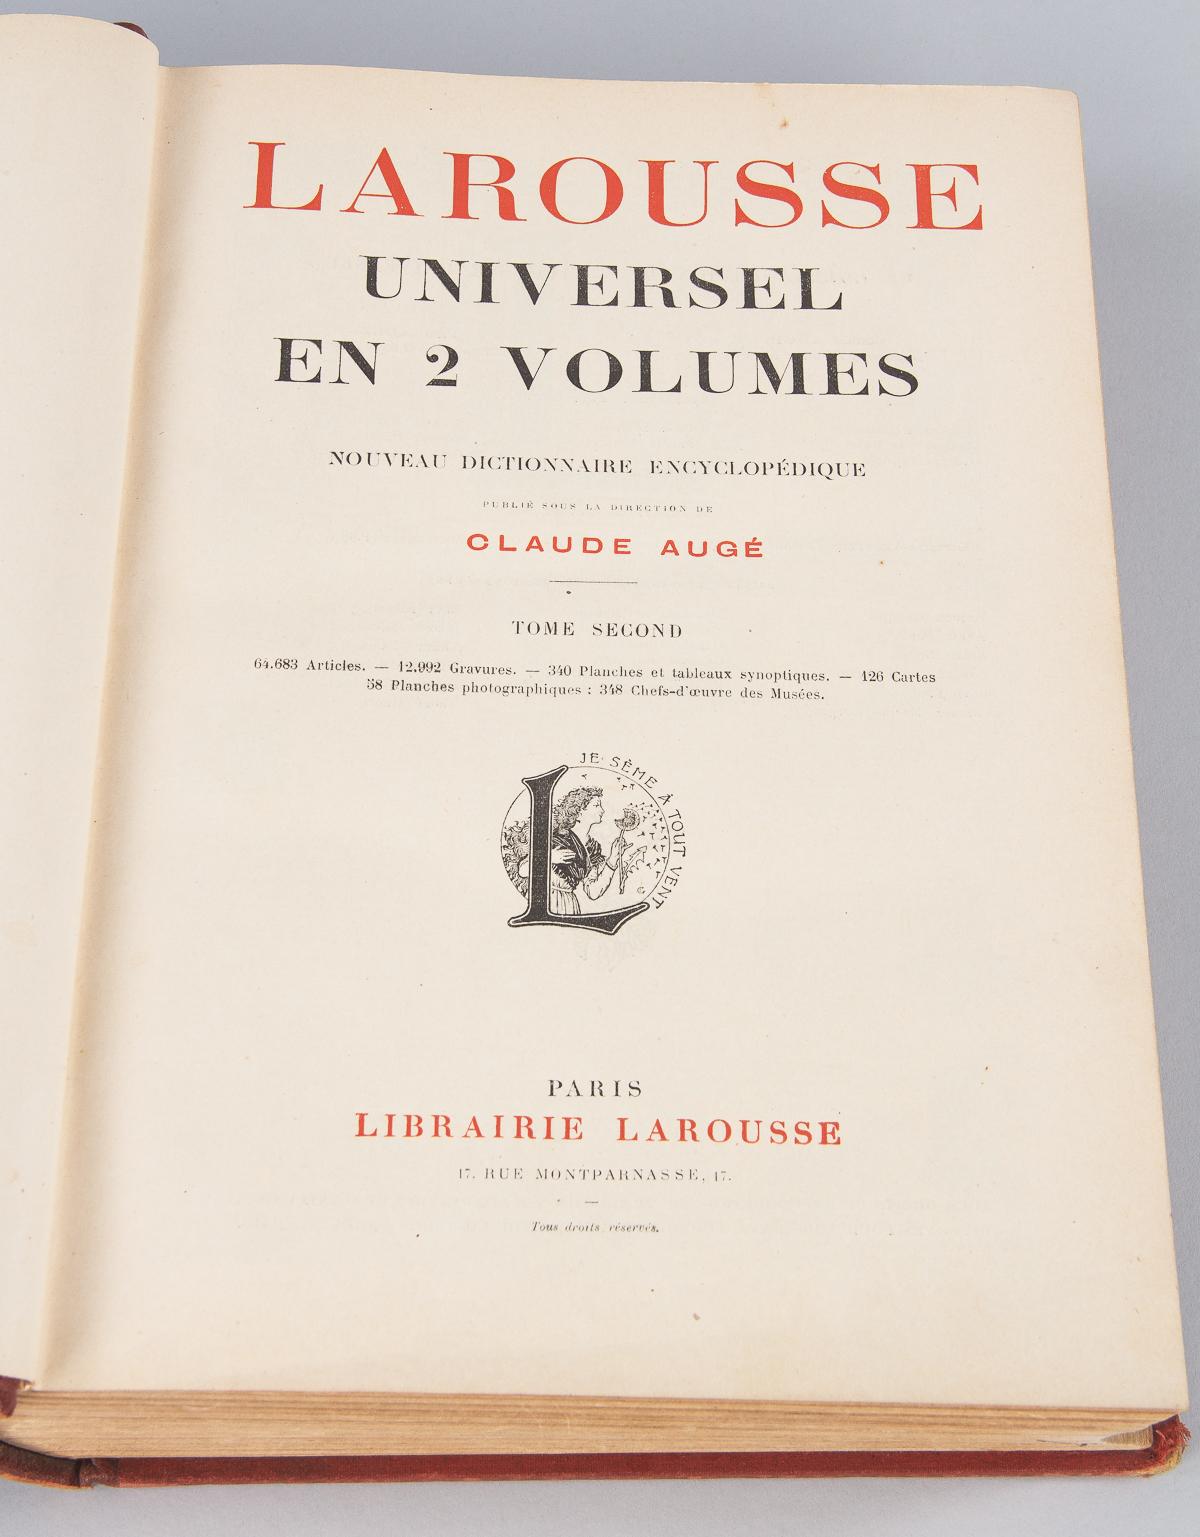 Early 20th Century French Encyclopedia Books, Larousse Universel, 1922